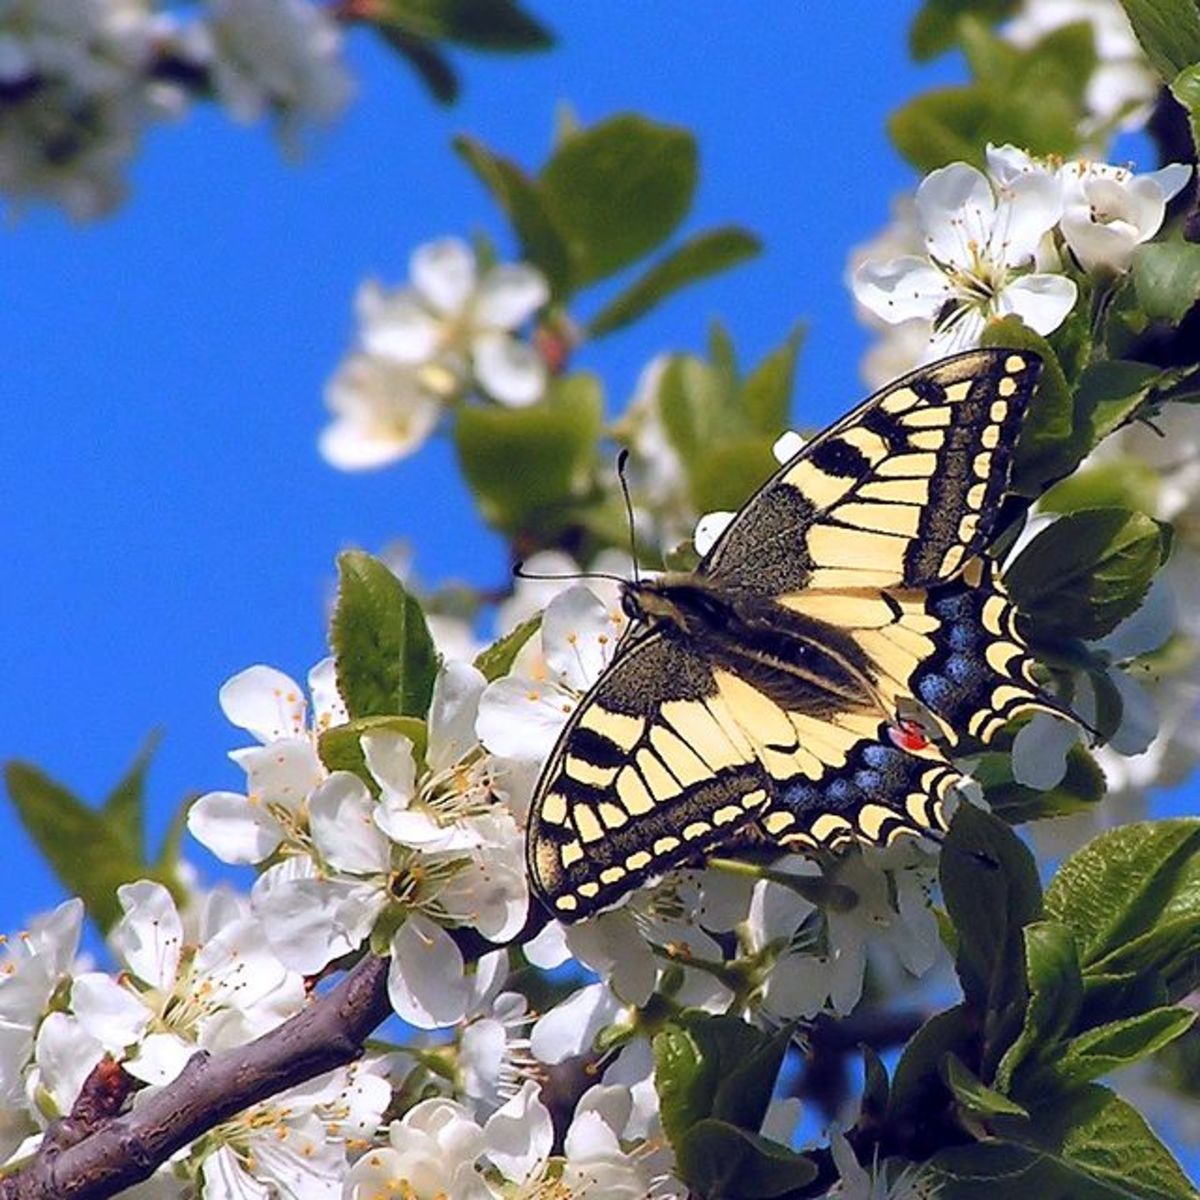 Swallowtail butterfly (Papilio machaon)